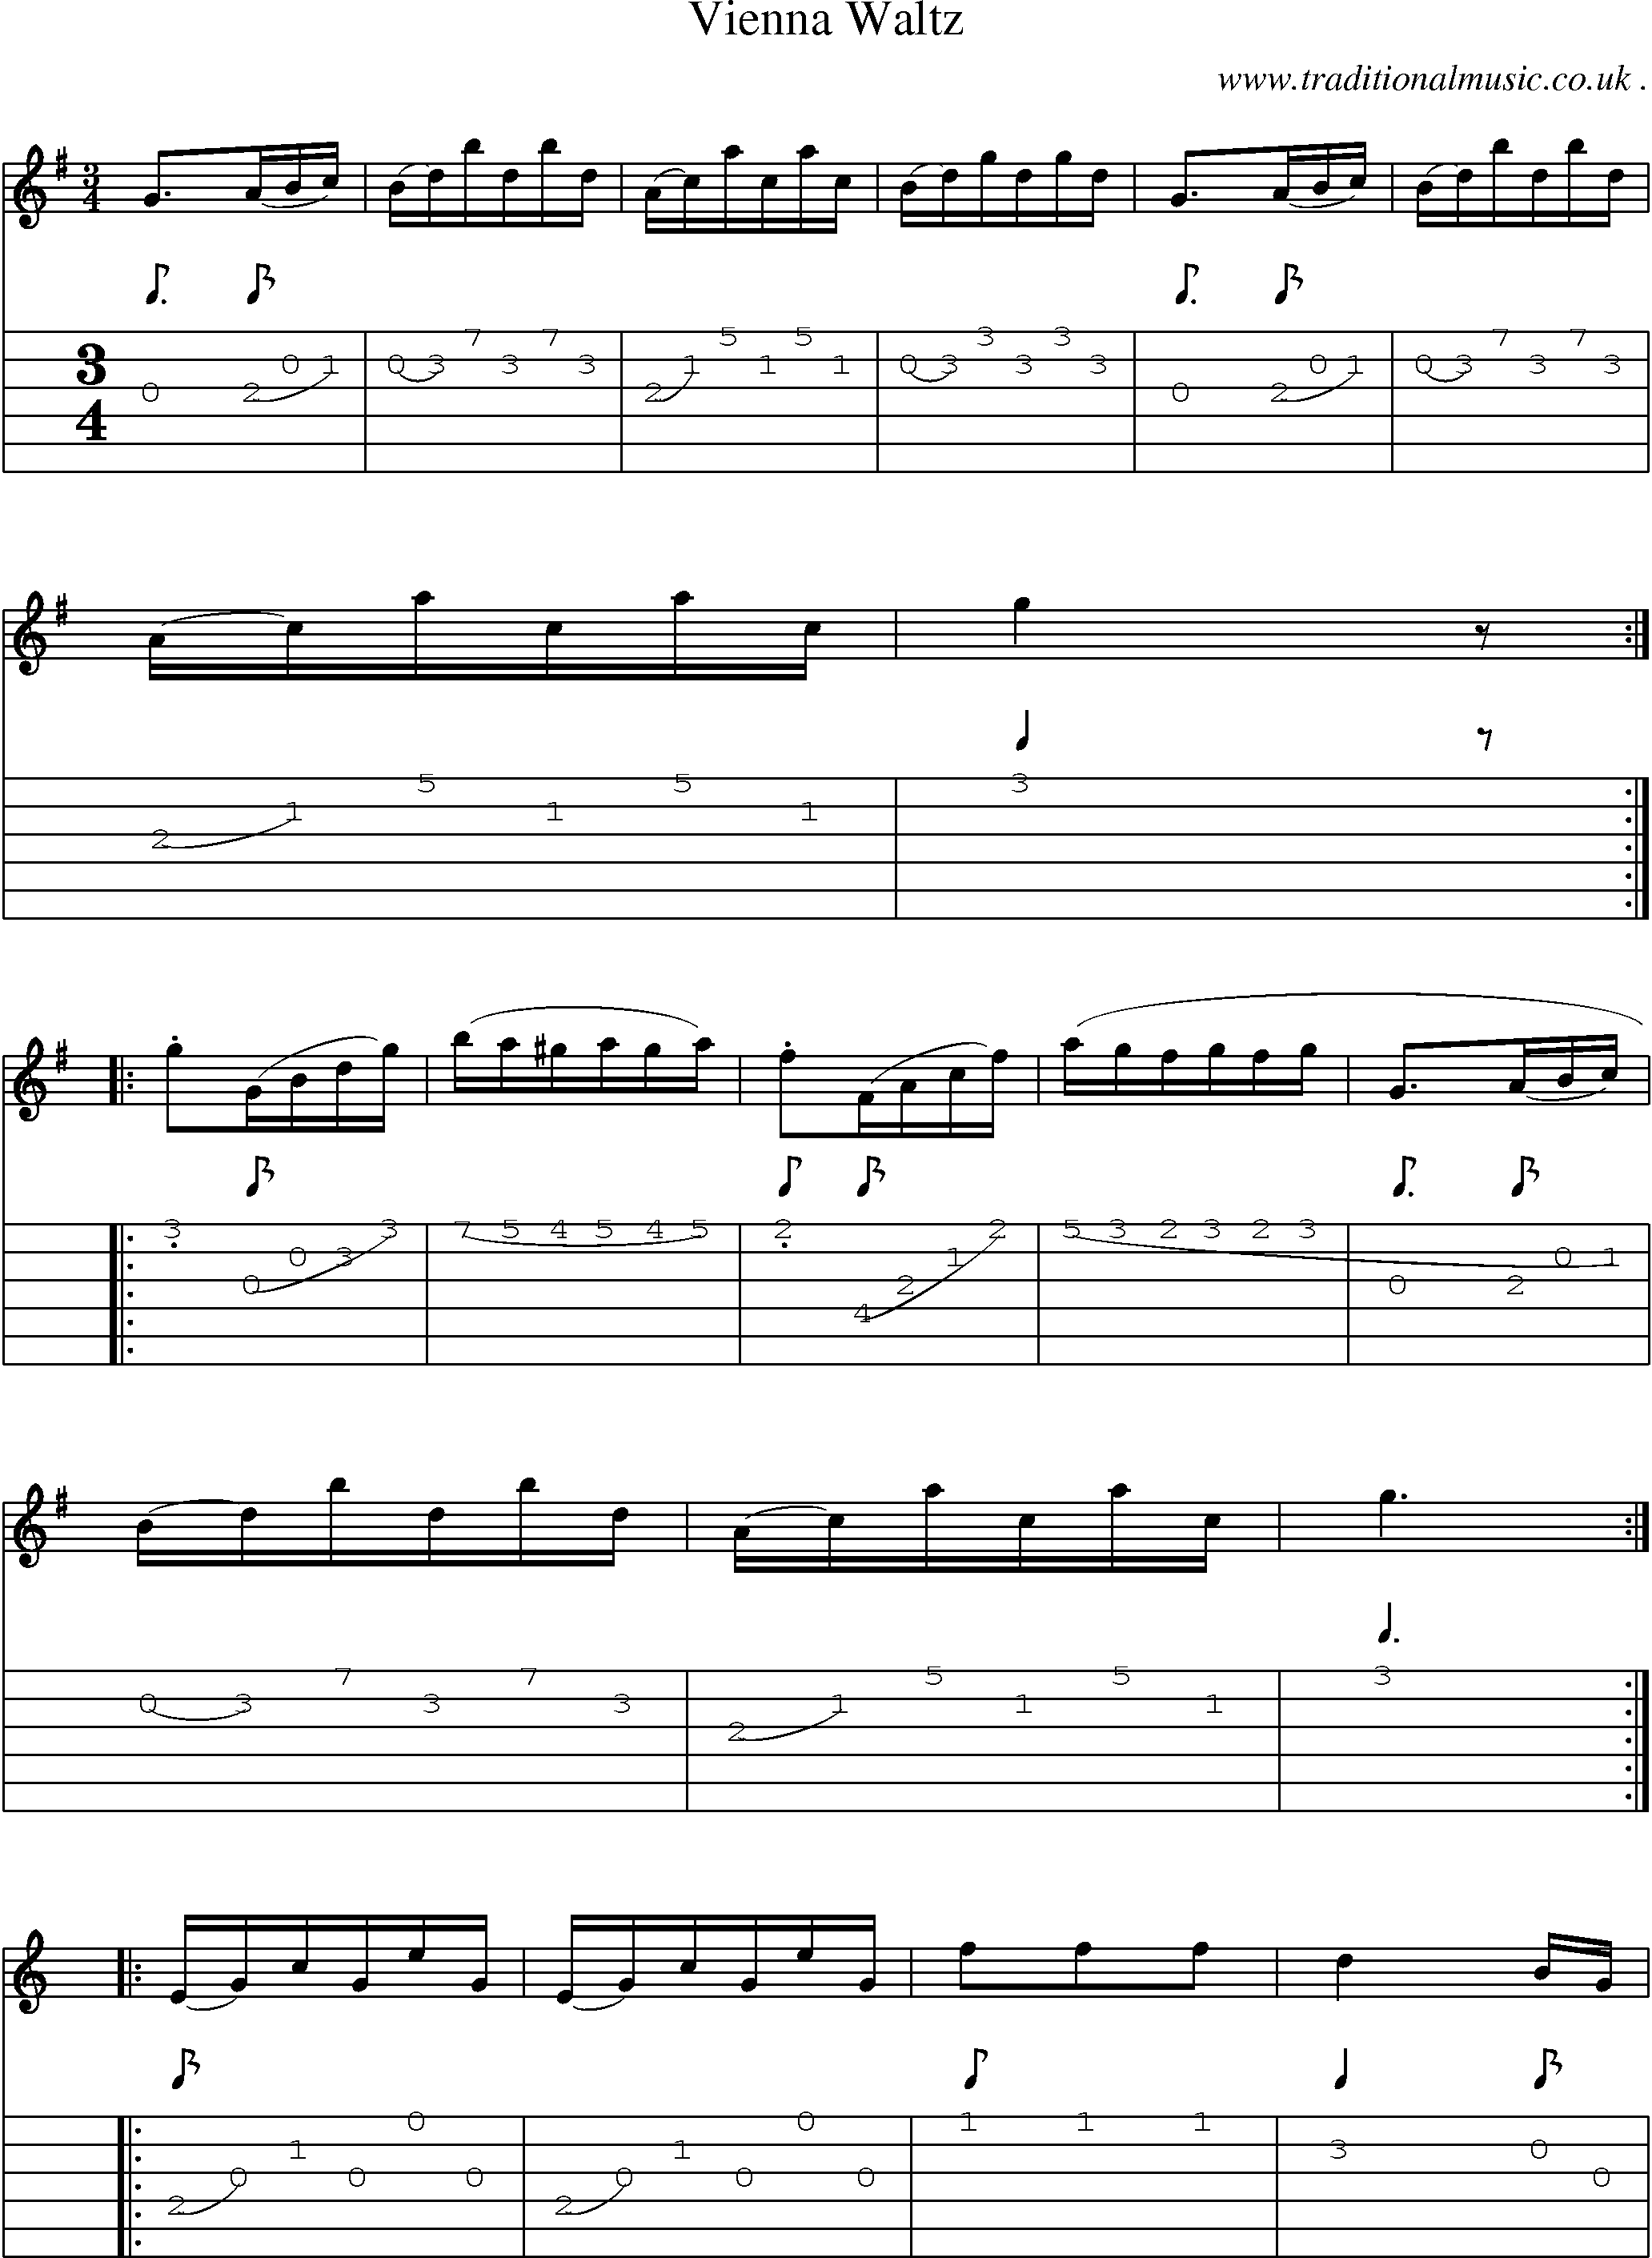 Sheet-Music and Guitar Tabs for Vienna Waltz